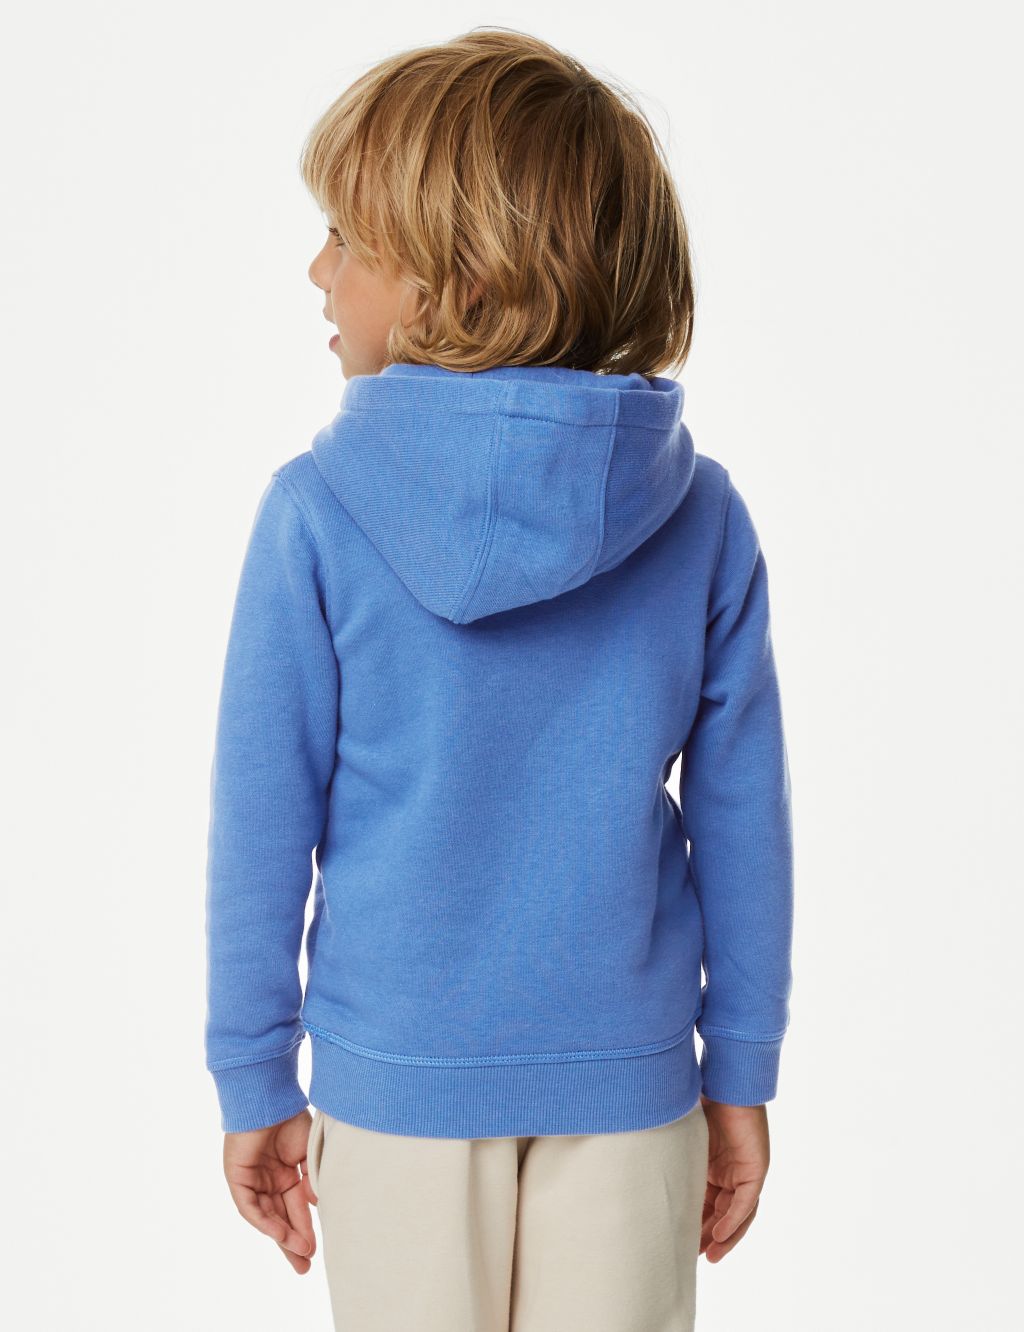 Cotton Rich Pullover Hoodies (2-7 Yrs) image 4